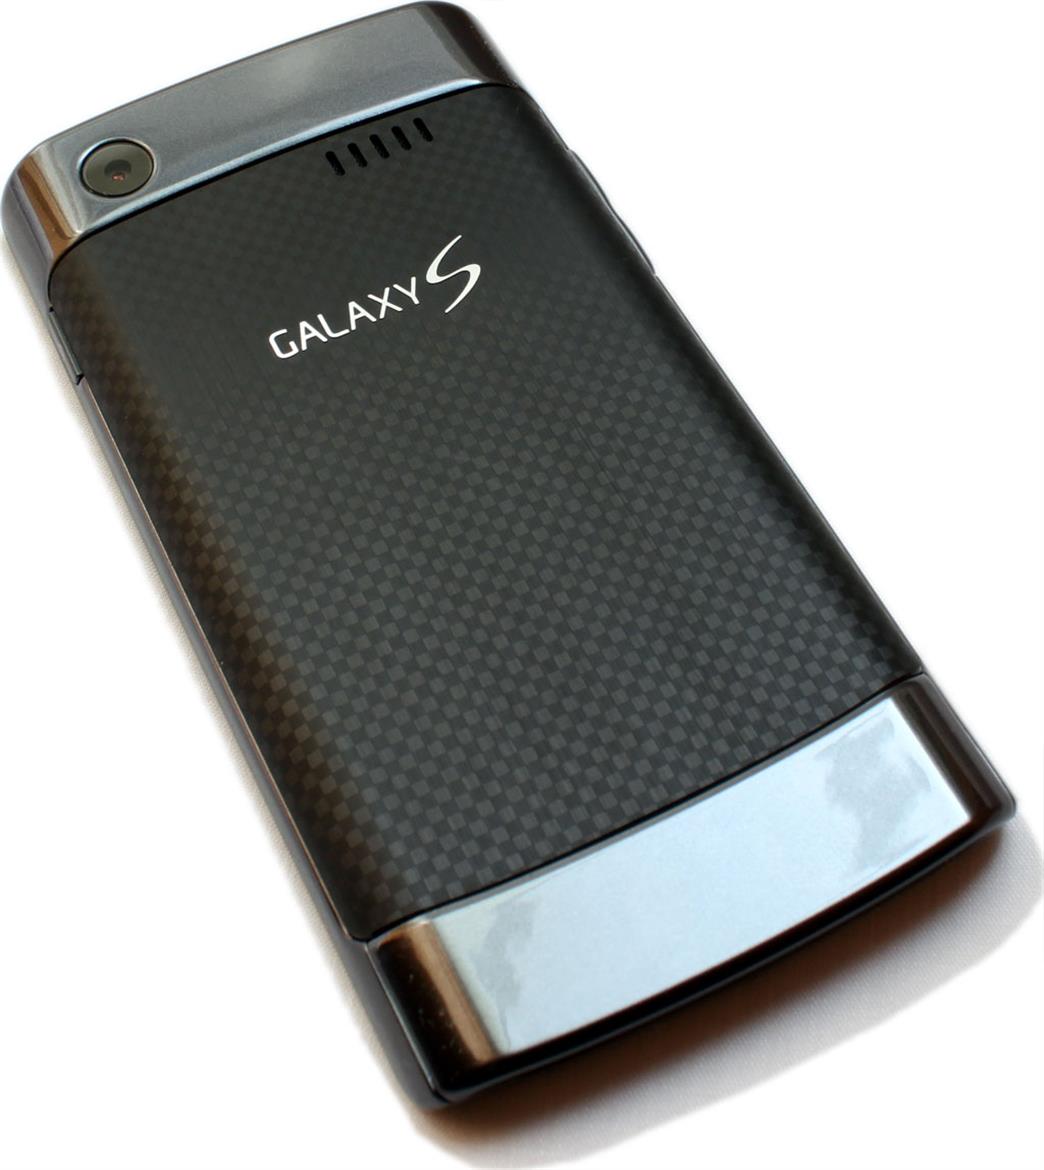 Samsung Captivate Android Smartphone Review